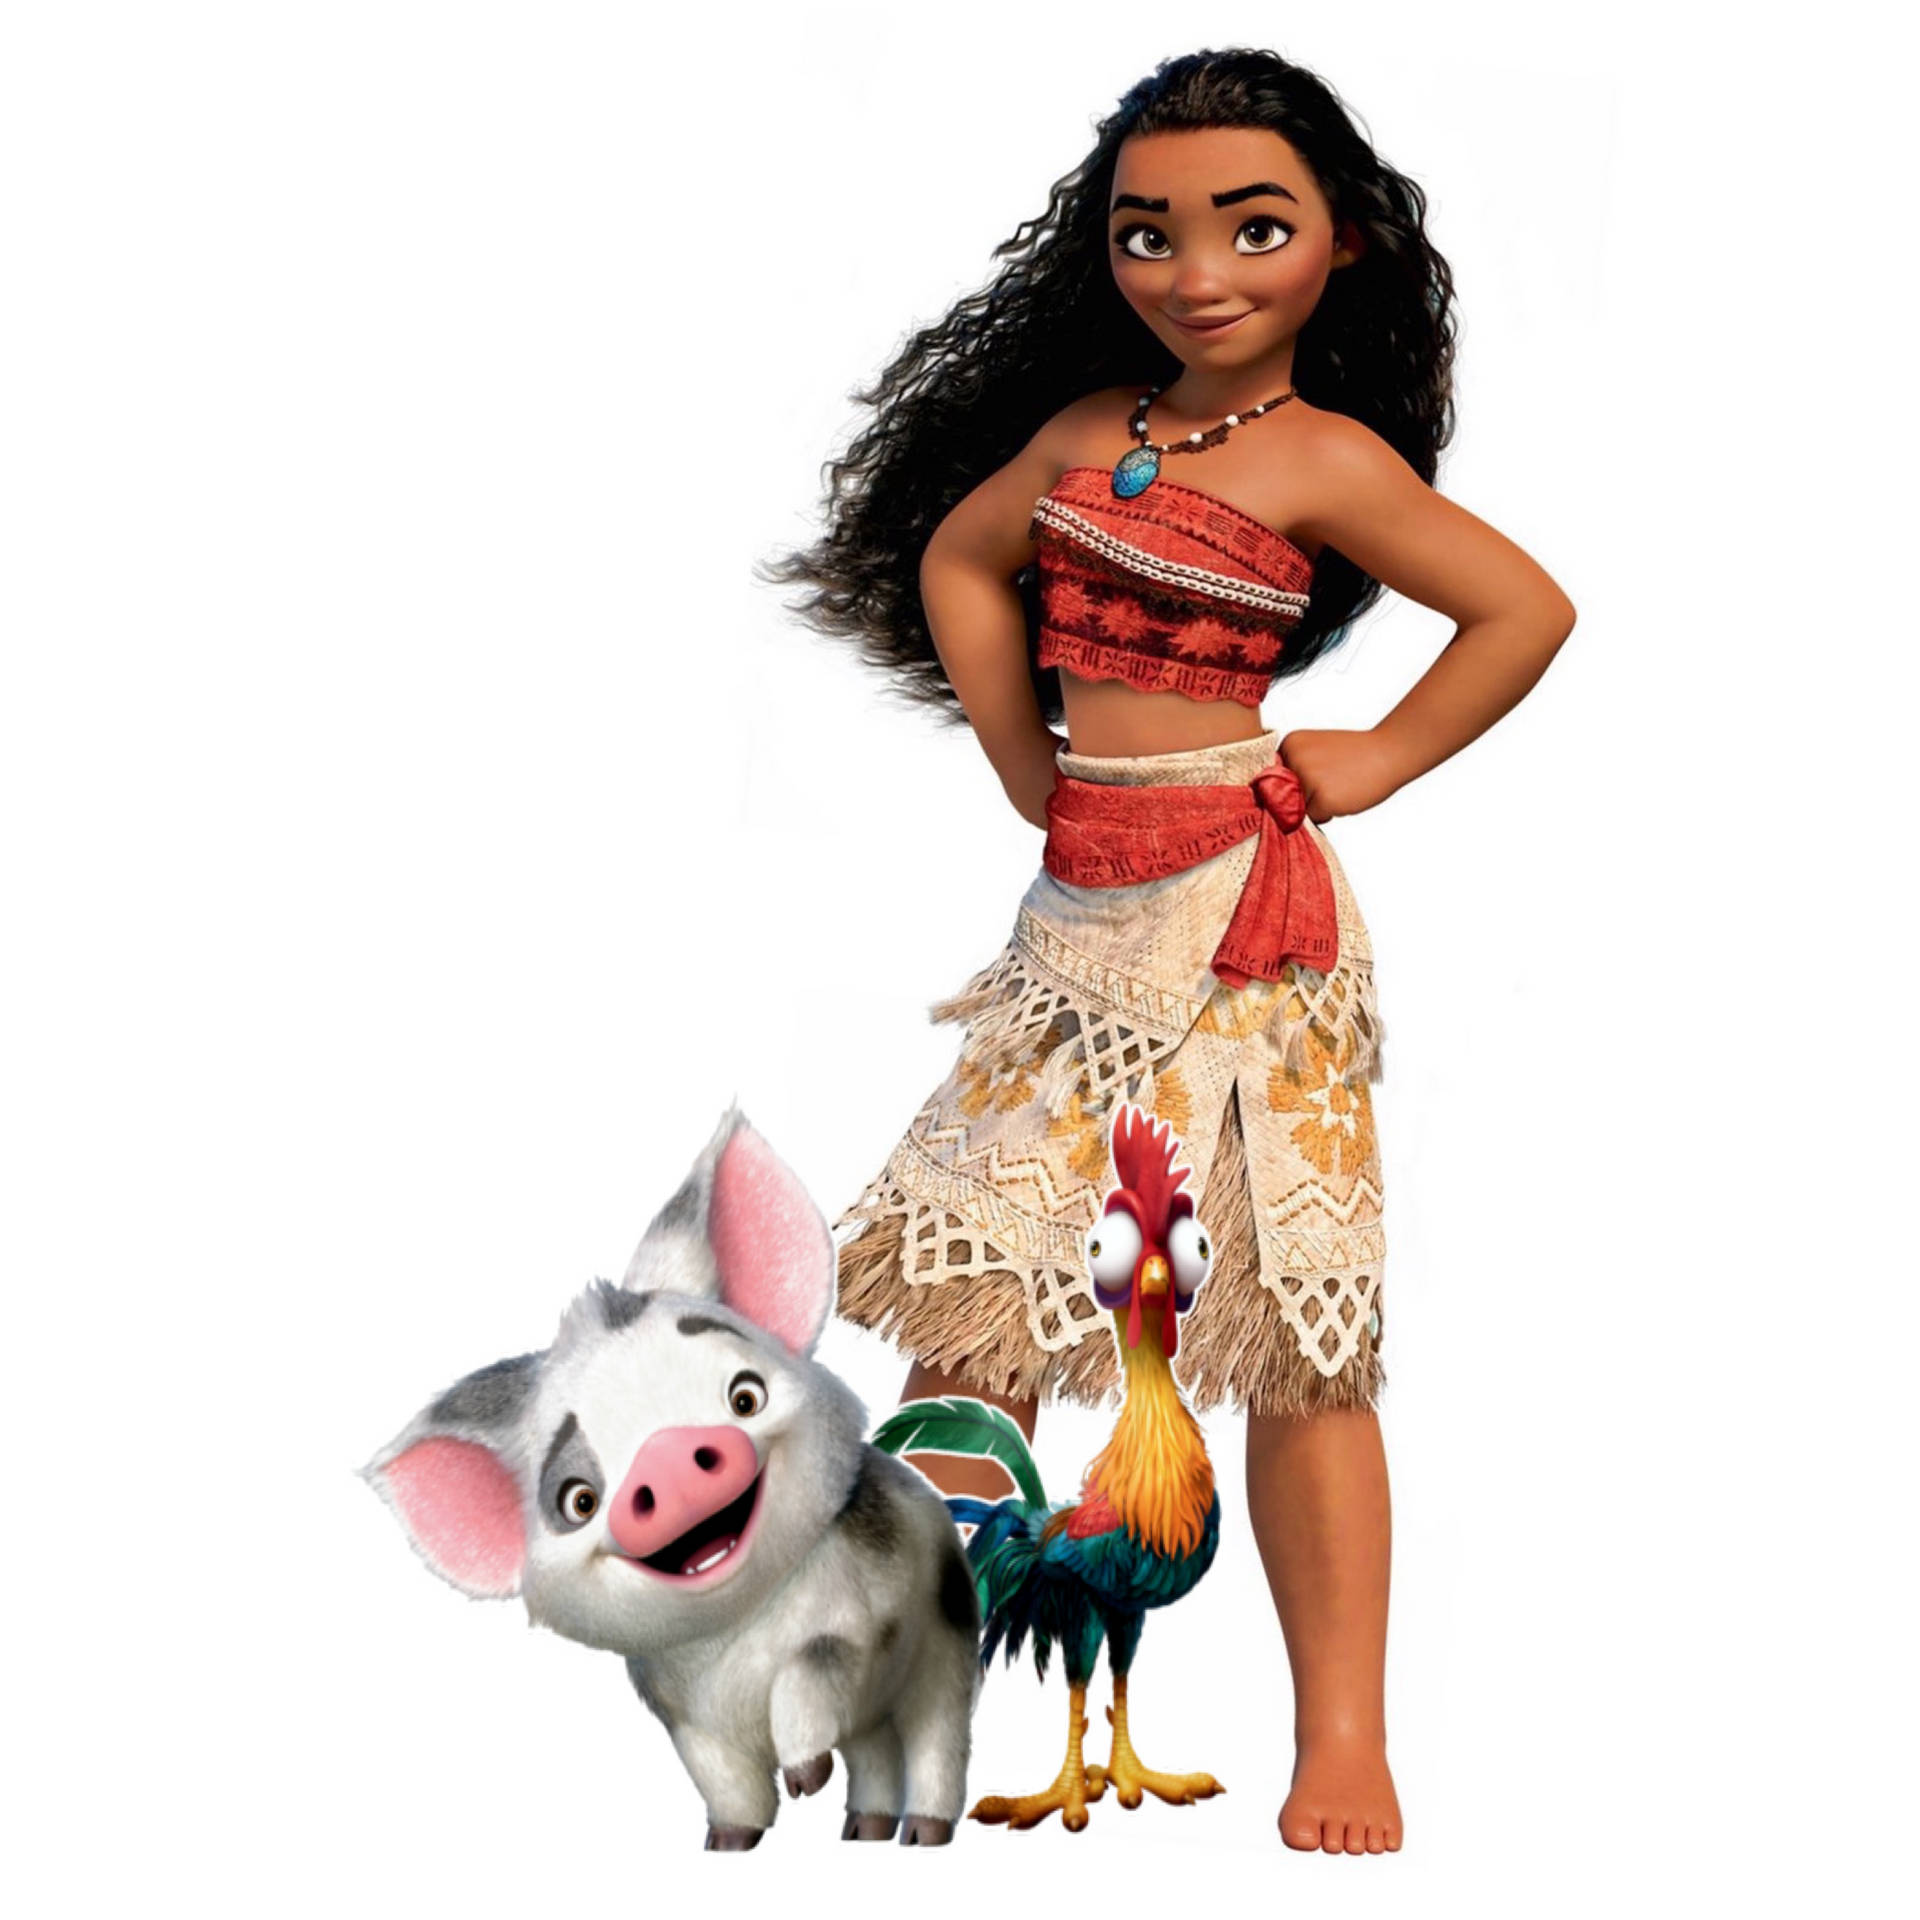 Moana 4000X4000 Wallpaper and Background Image